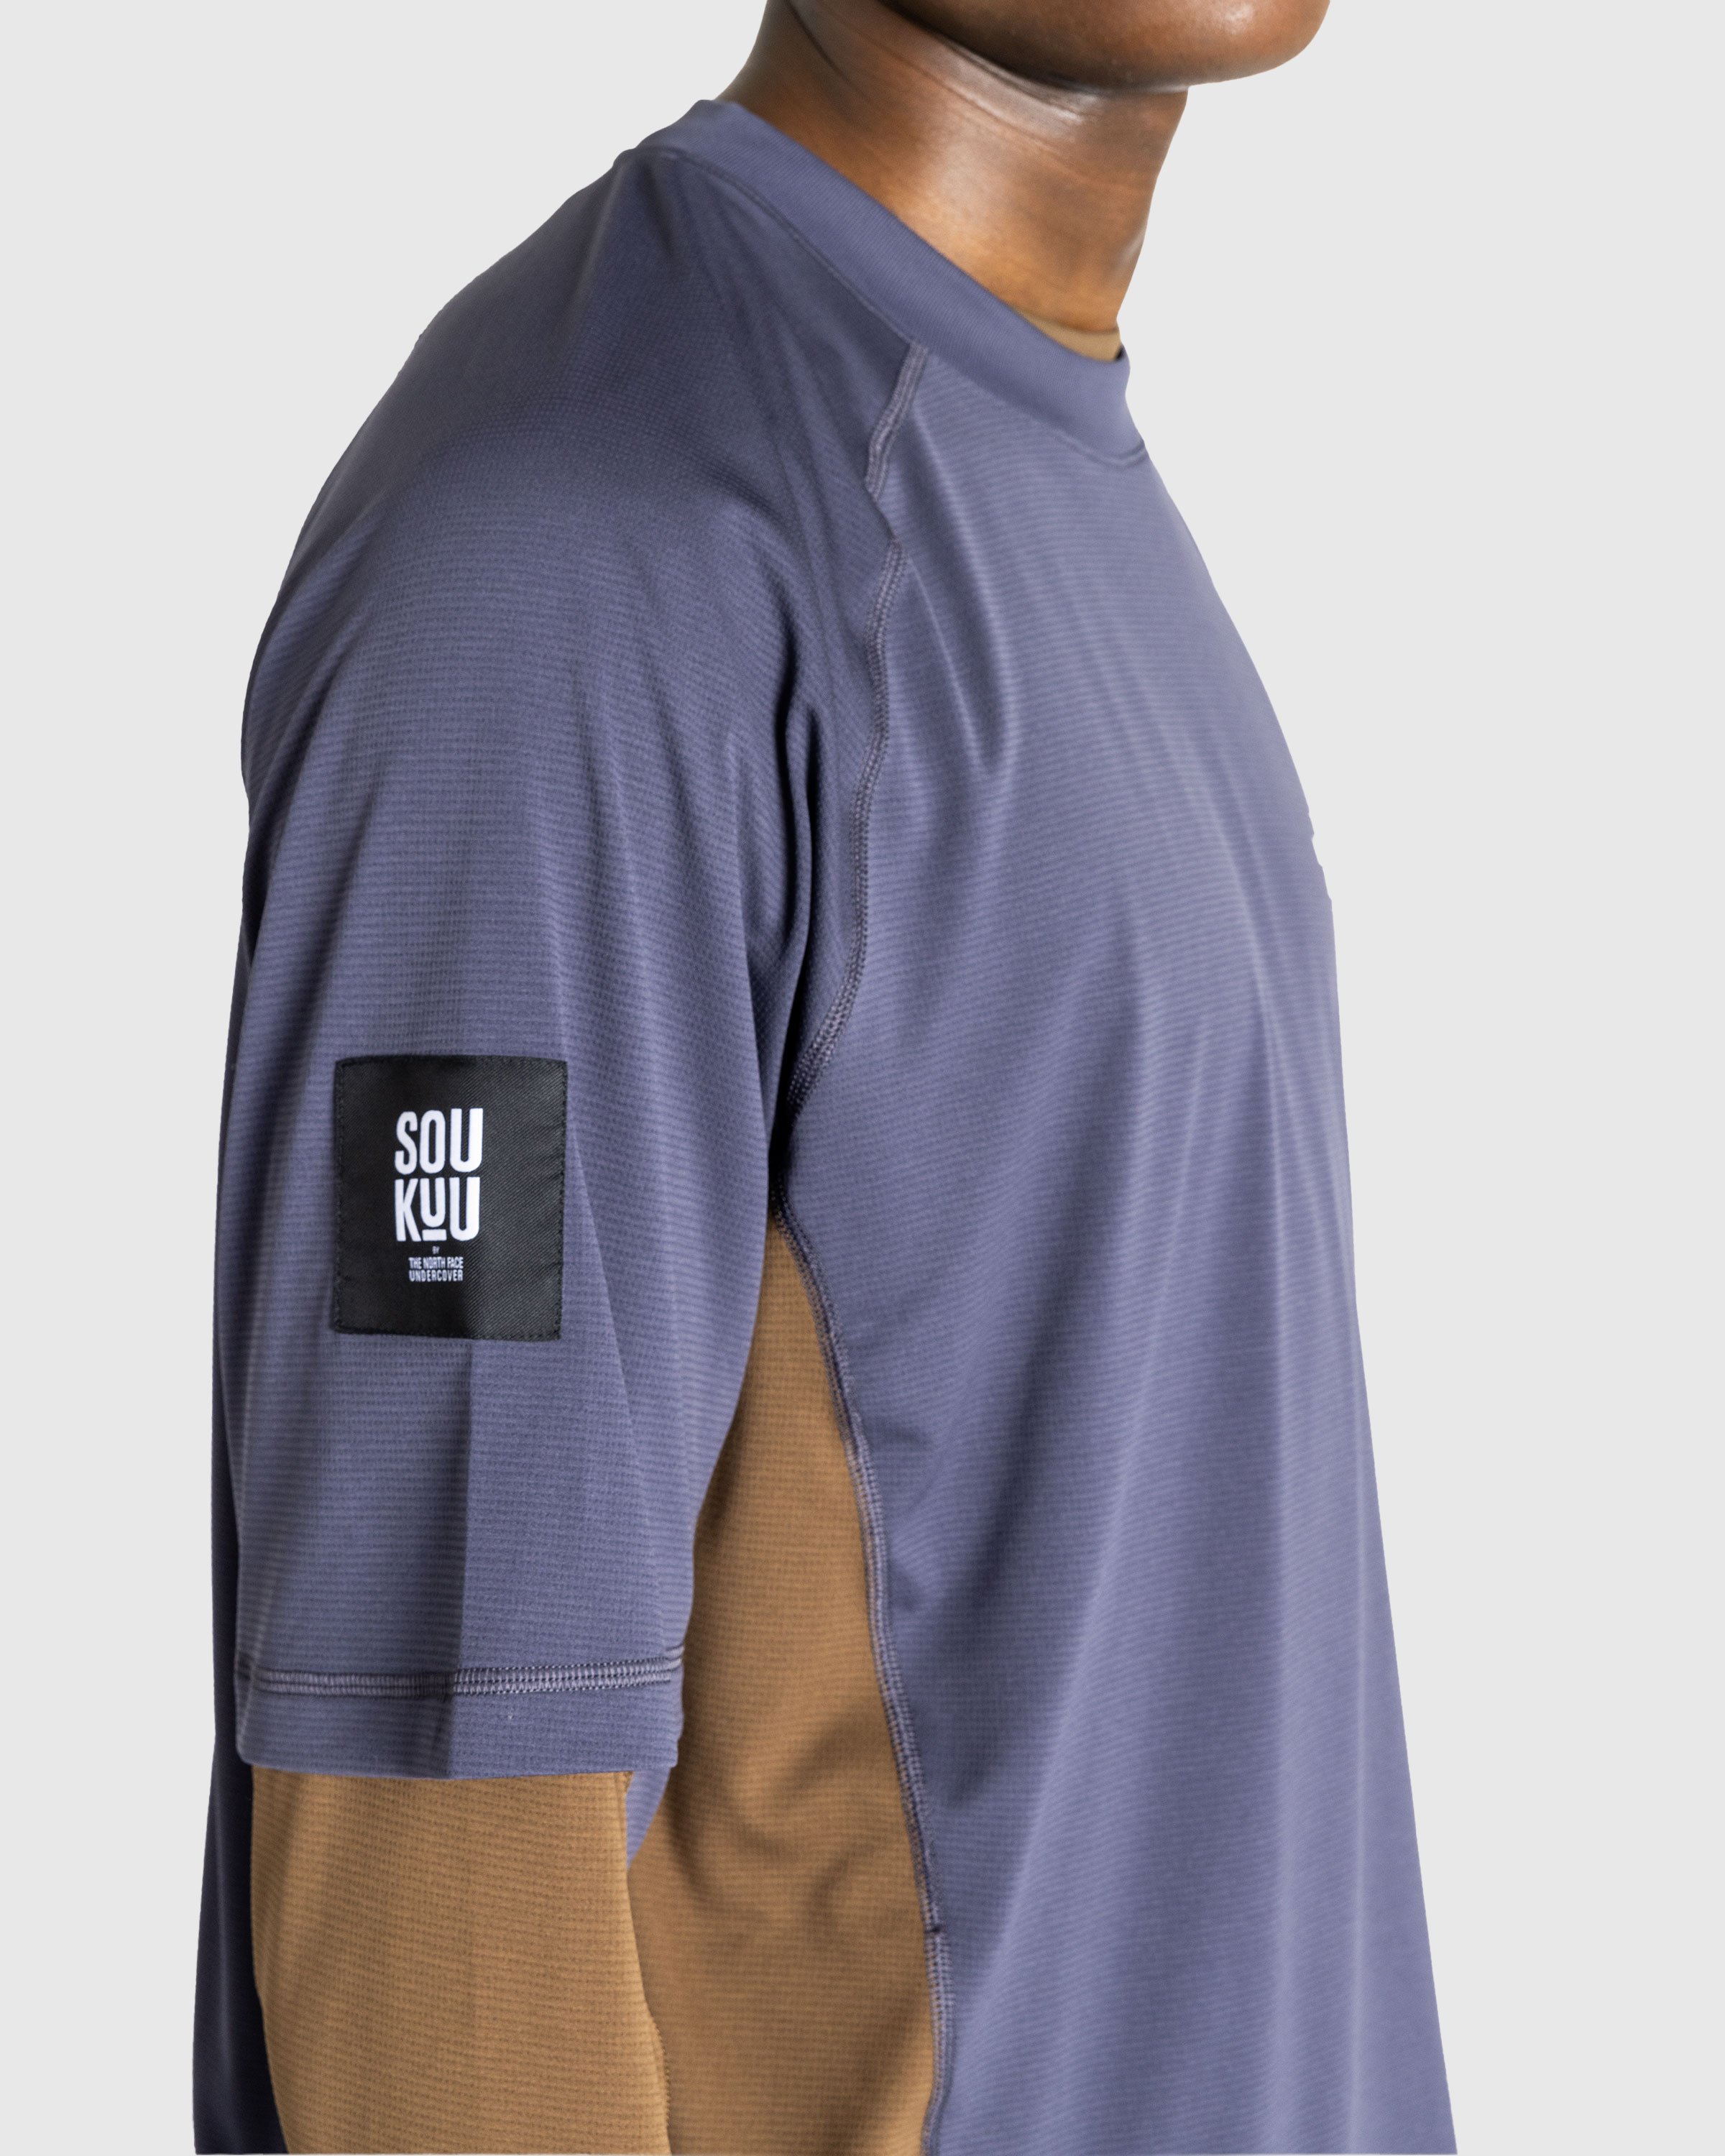 The North Face x UNDERCOVER - SOUKUU TRAIL RUN S/S TEE PERISCOPE GREY/DARK EAR - Clothing - Grey - Image 5